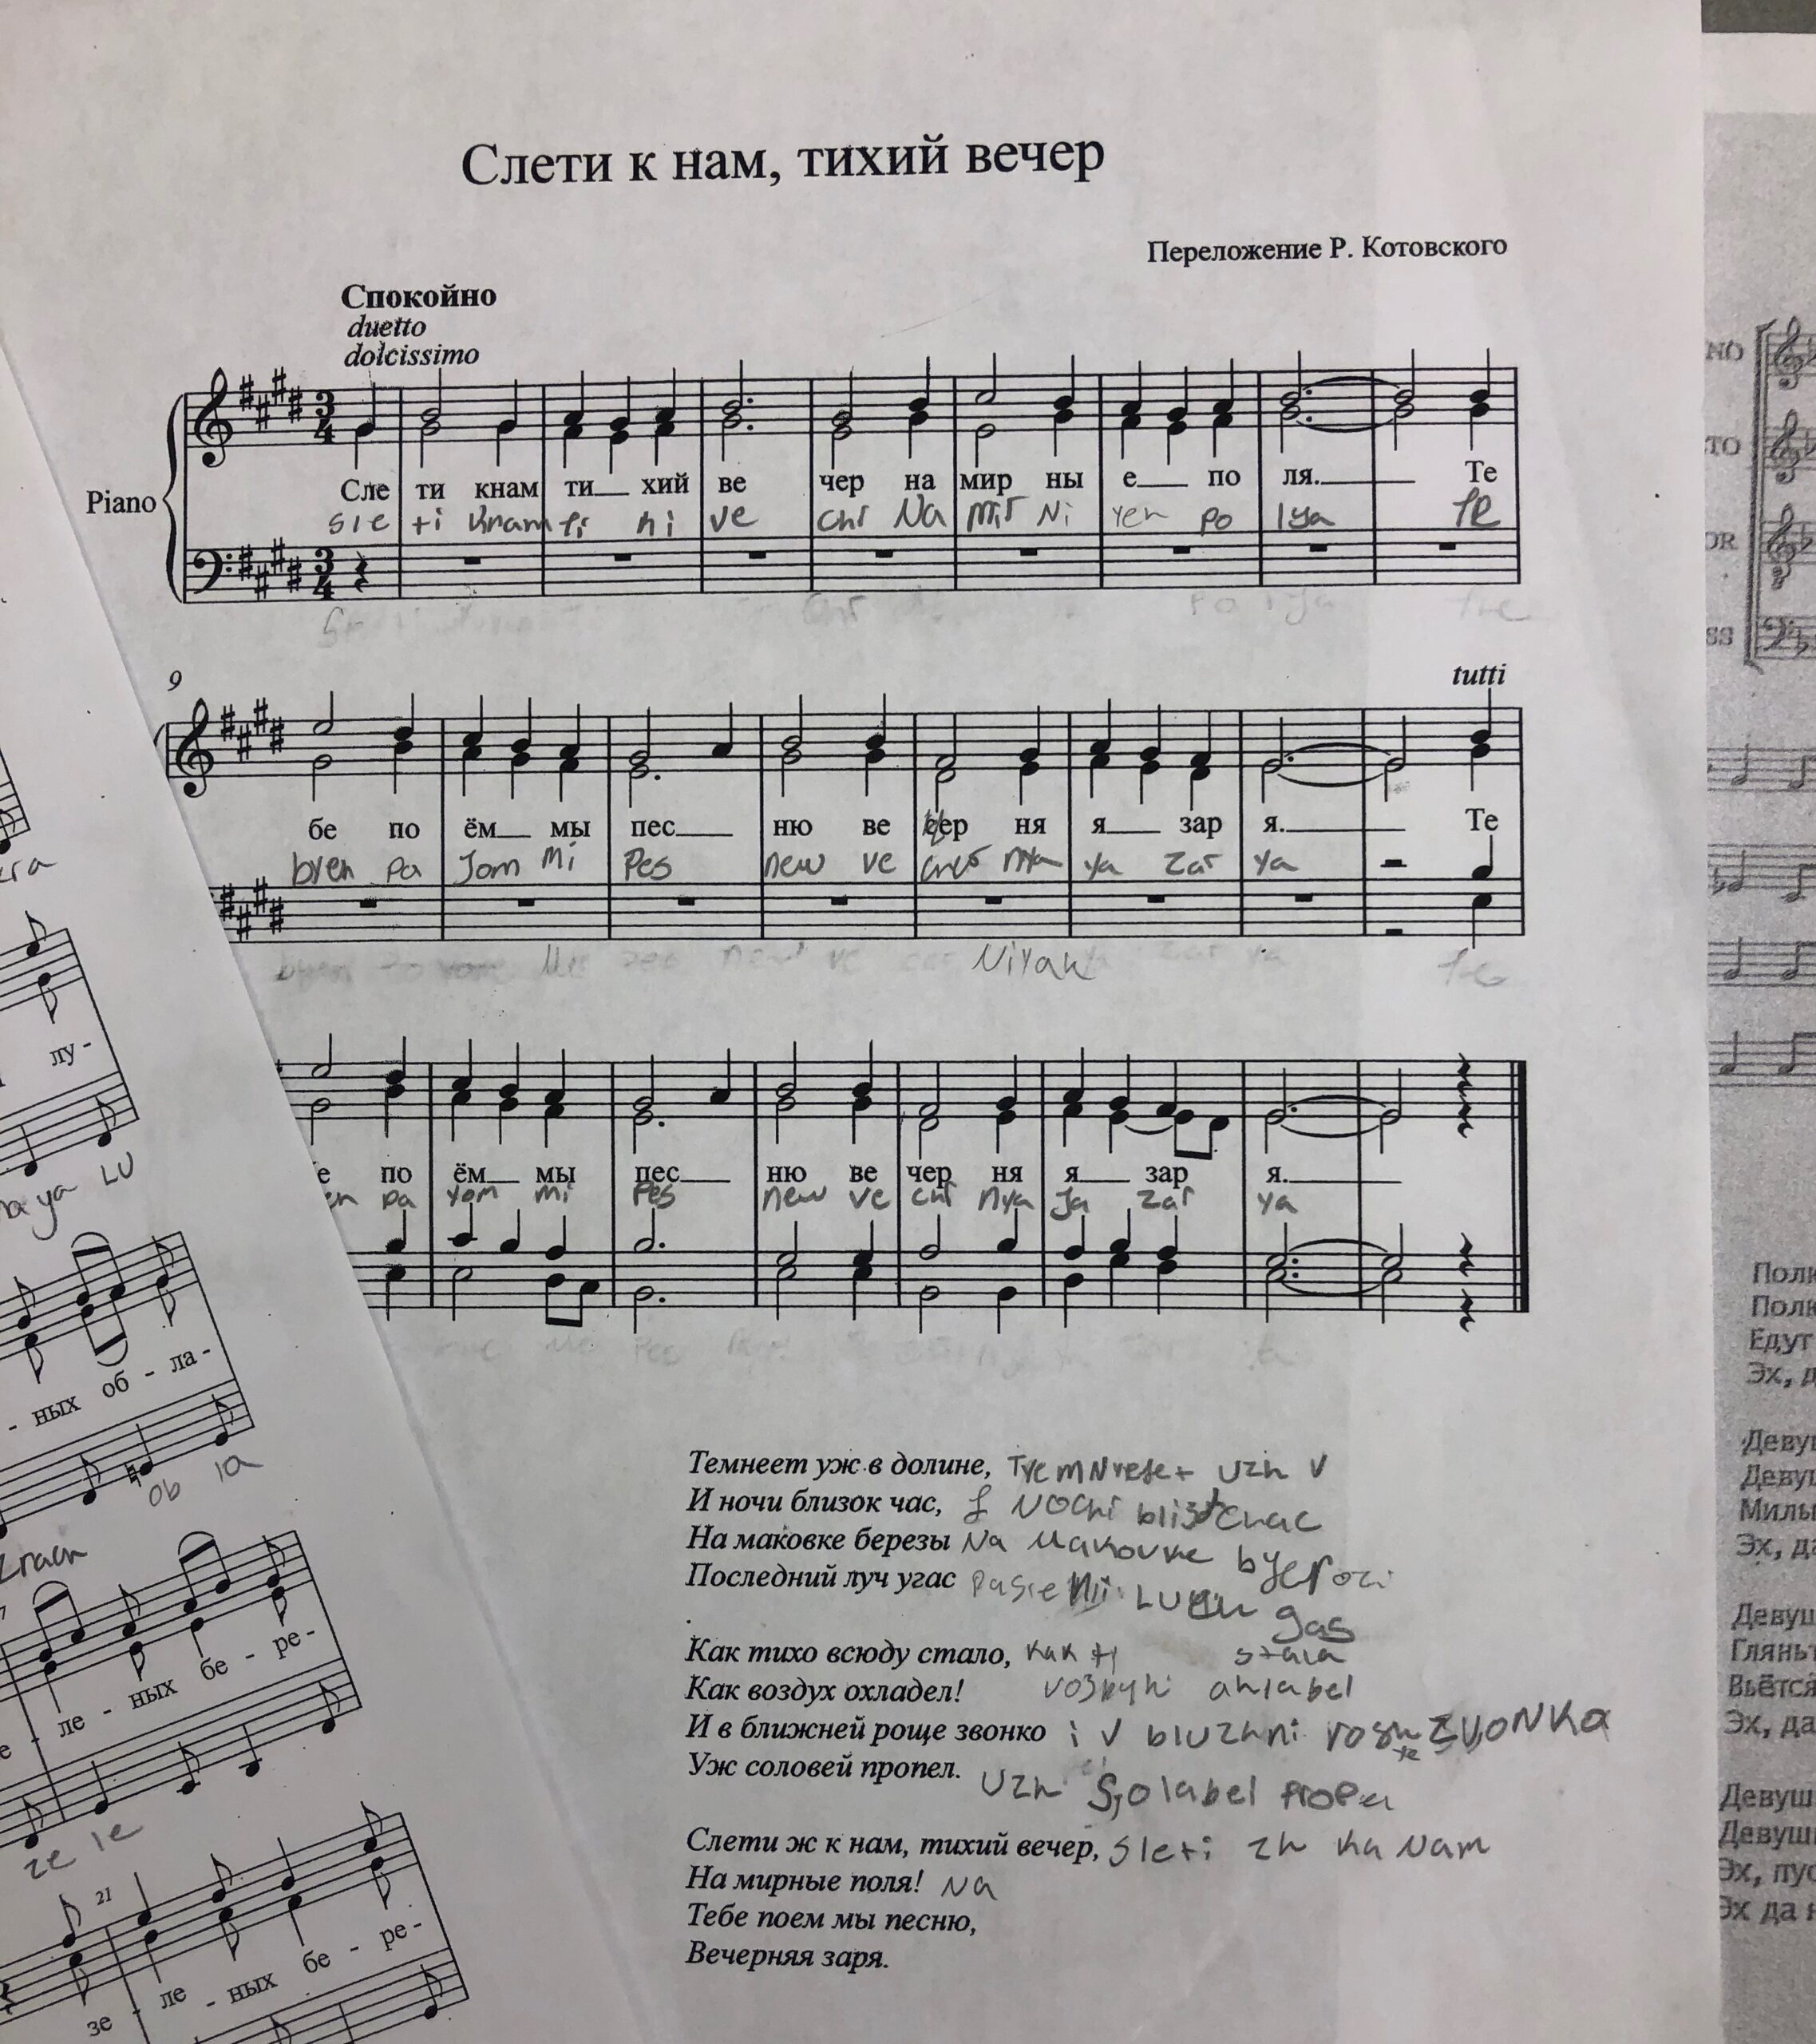 Sheets of Russian choral music with student notes. Photo courtesy of Randianne Leyshon. '09.